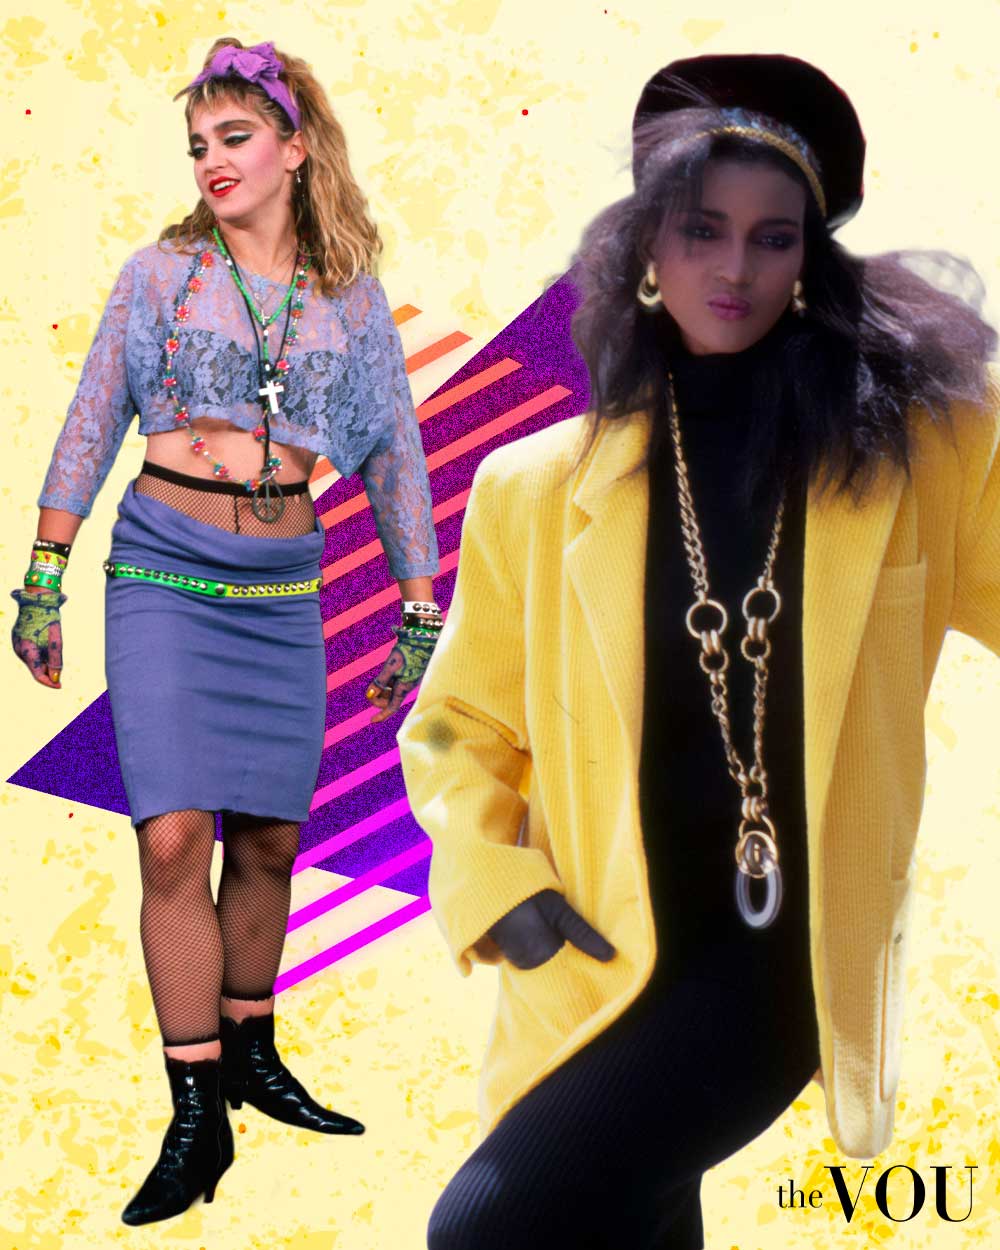 Neon Colors in Popular 80s Fashion